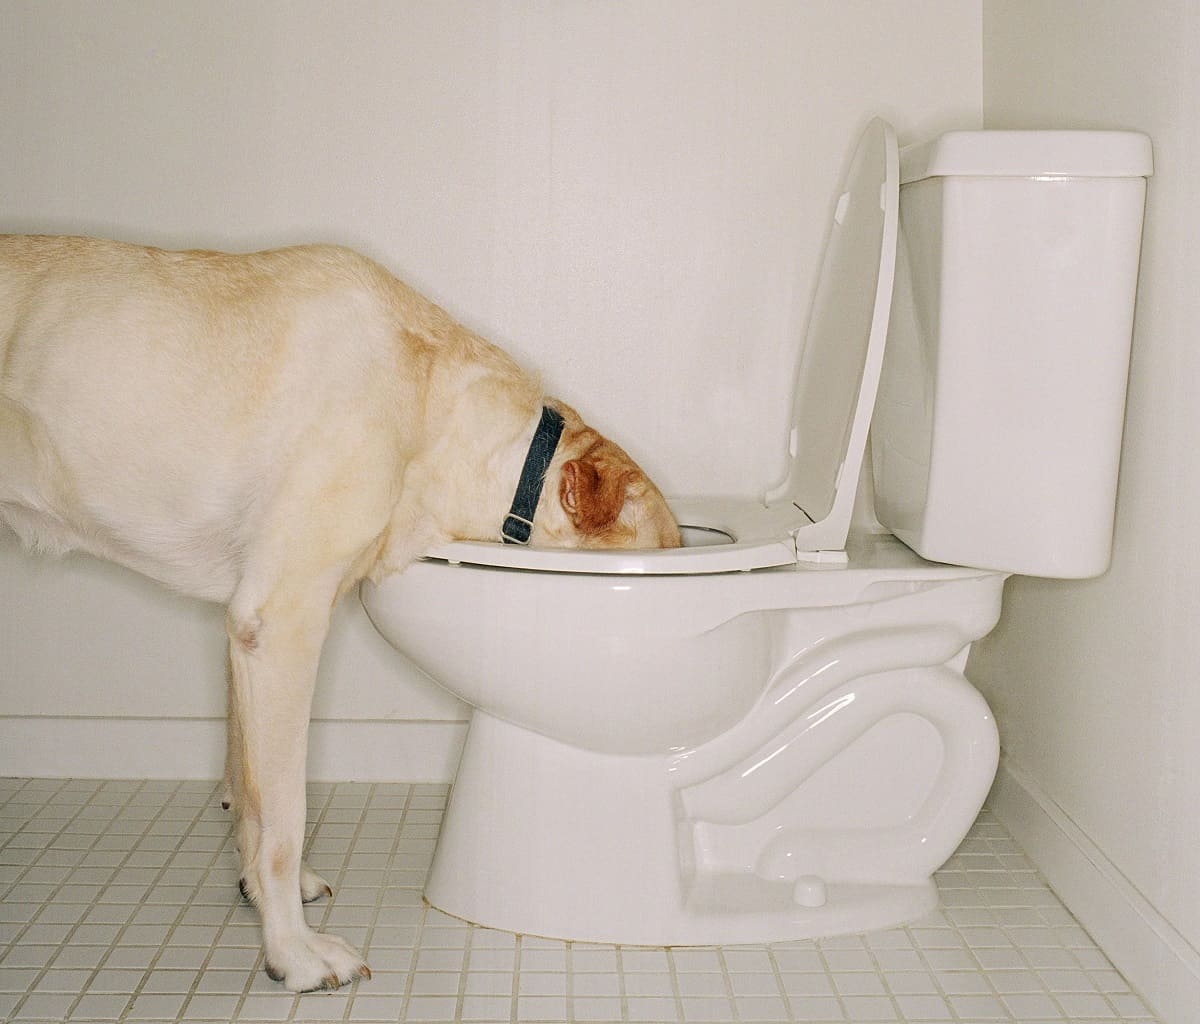 What To Do If Your Dog Drinks Toilet Bowl Cleaner